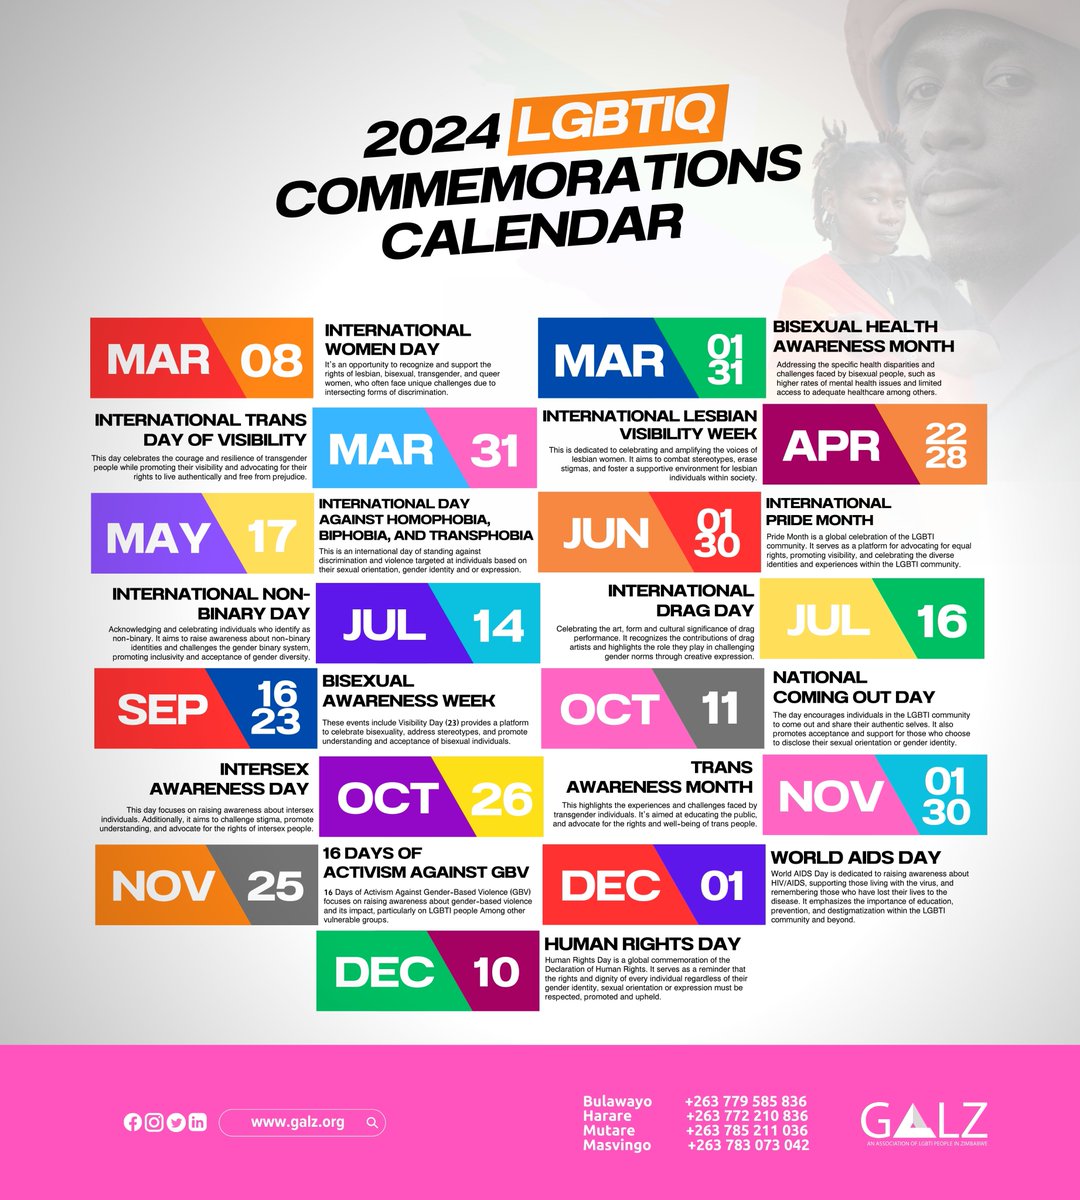 Mark your Calendars! Here is a look at all the LGBTIQ commemorations to look forward to this year. #commemorations #LGBTIQcommunity #galz